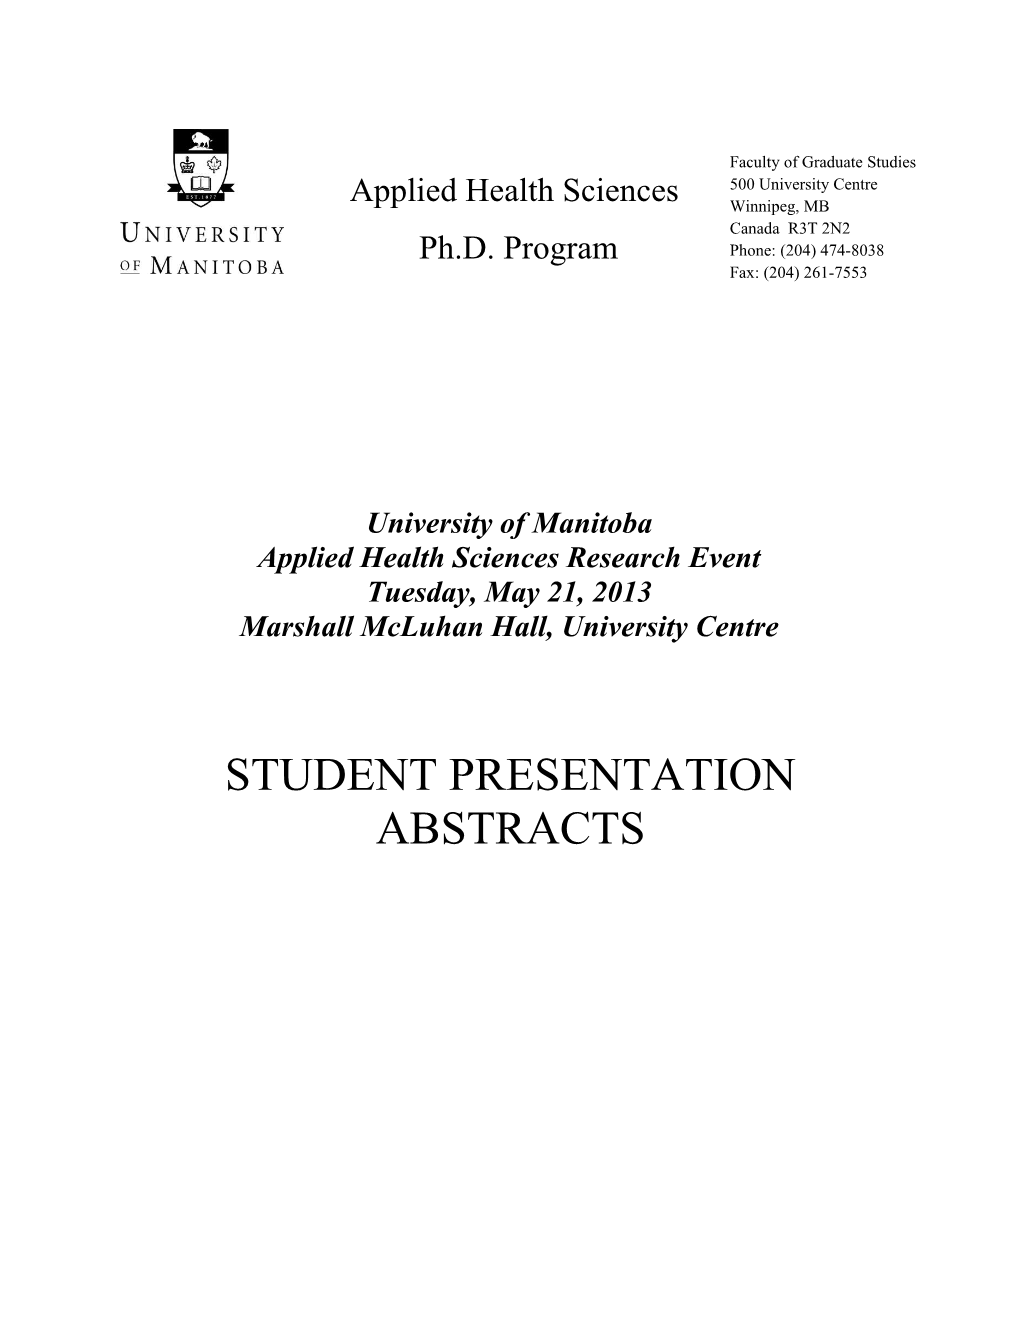 Applied Health Sciences Research Event